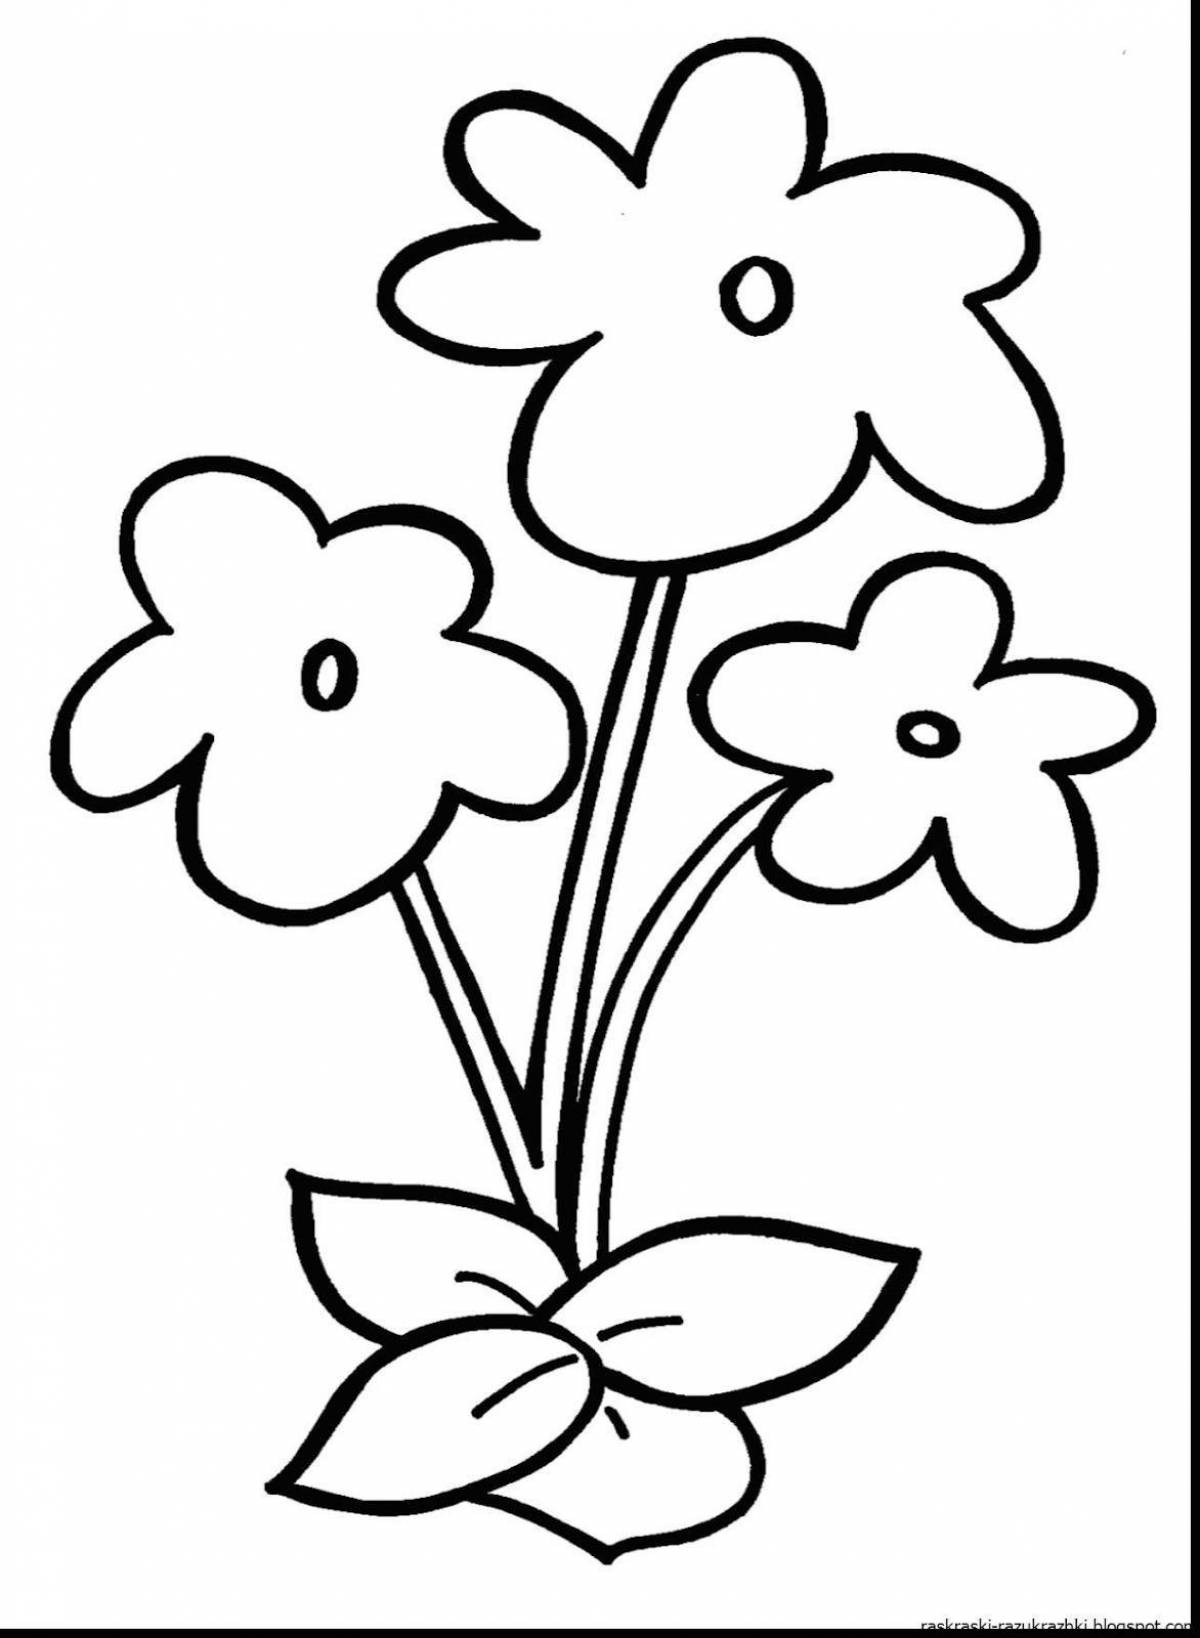 Delightful flower coloring book for 4-5 year olds